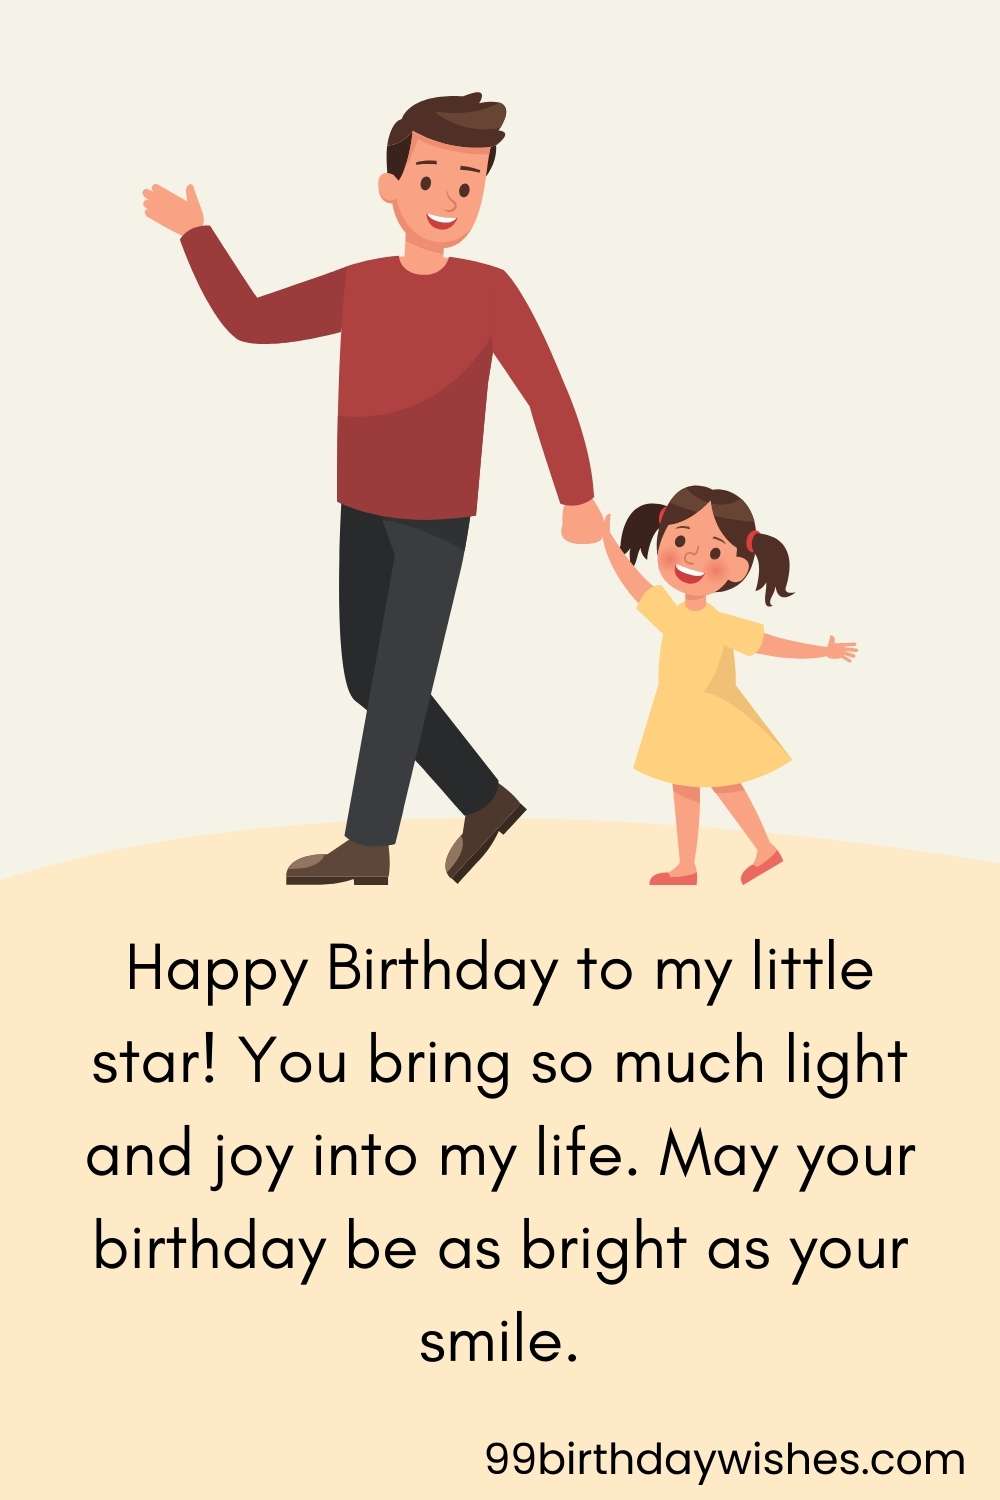 Happy Birthdays Wishes for Daughter from Dad